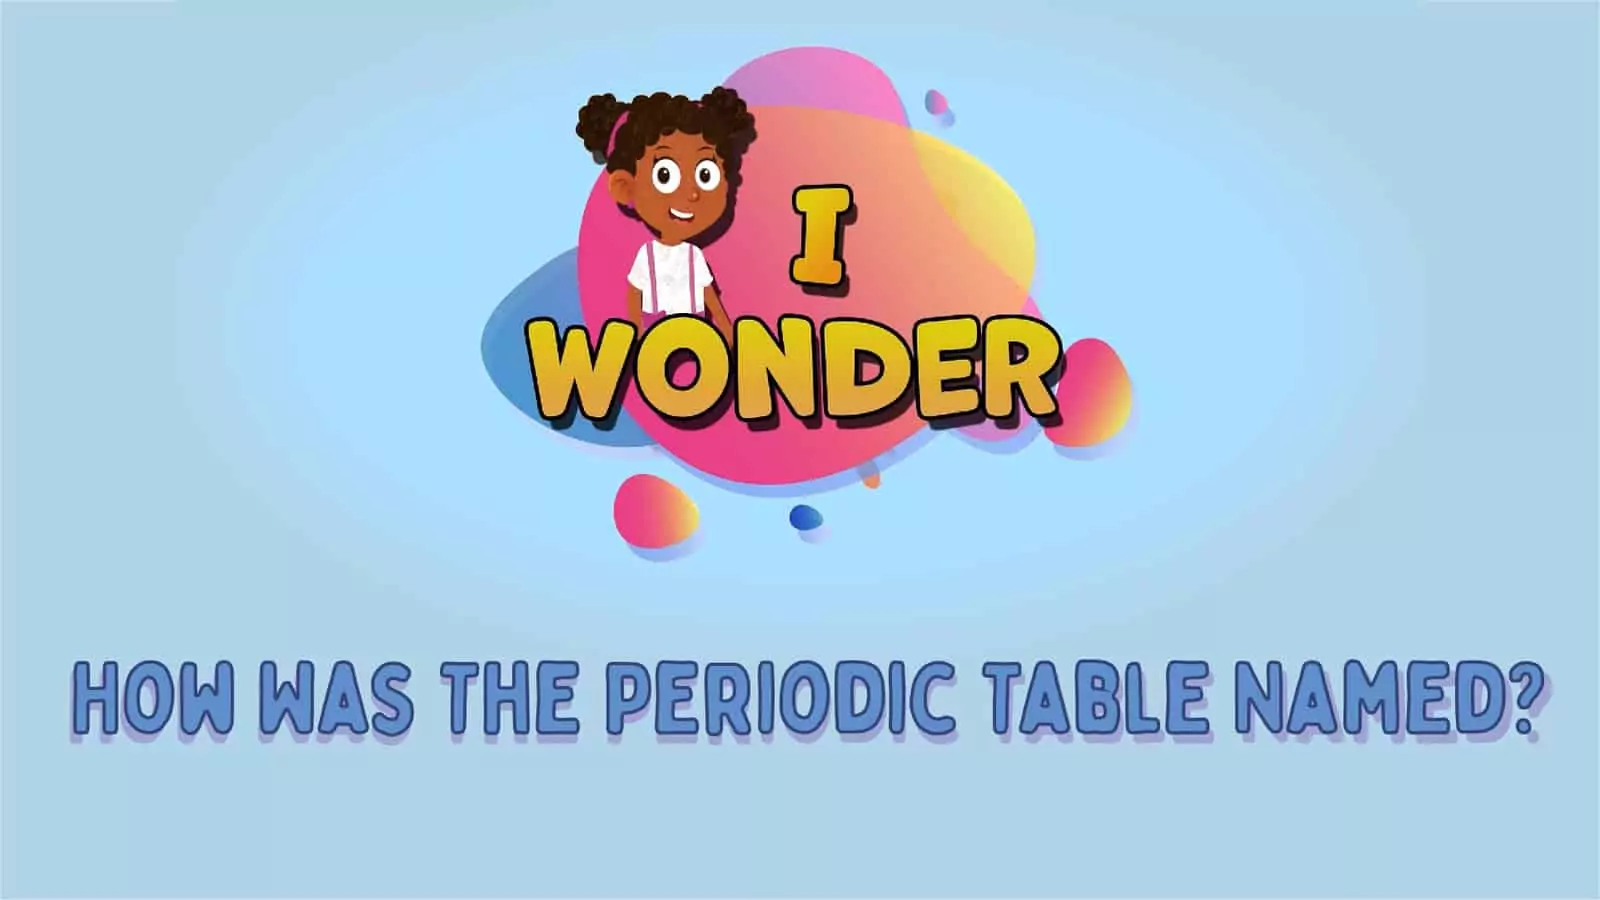 How Was The Periodic Table Named?